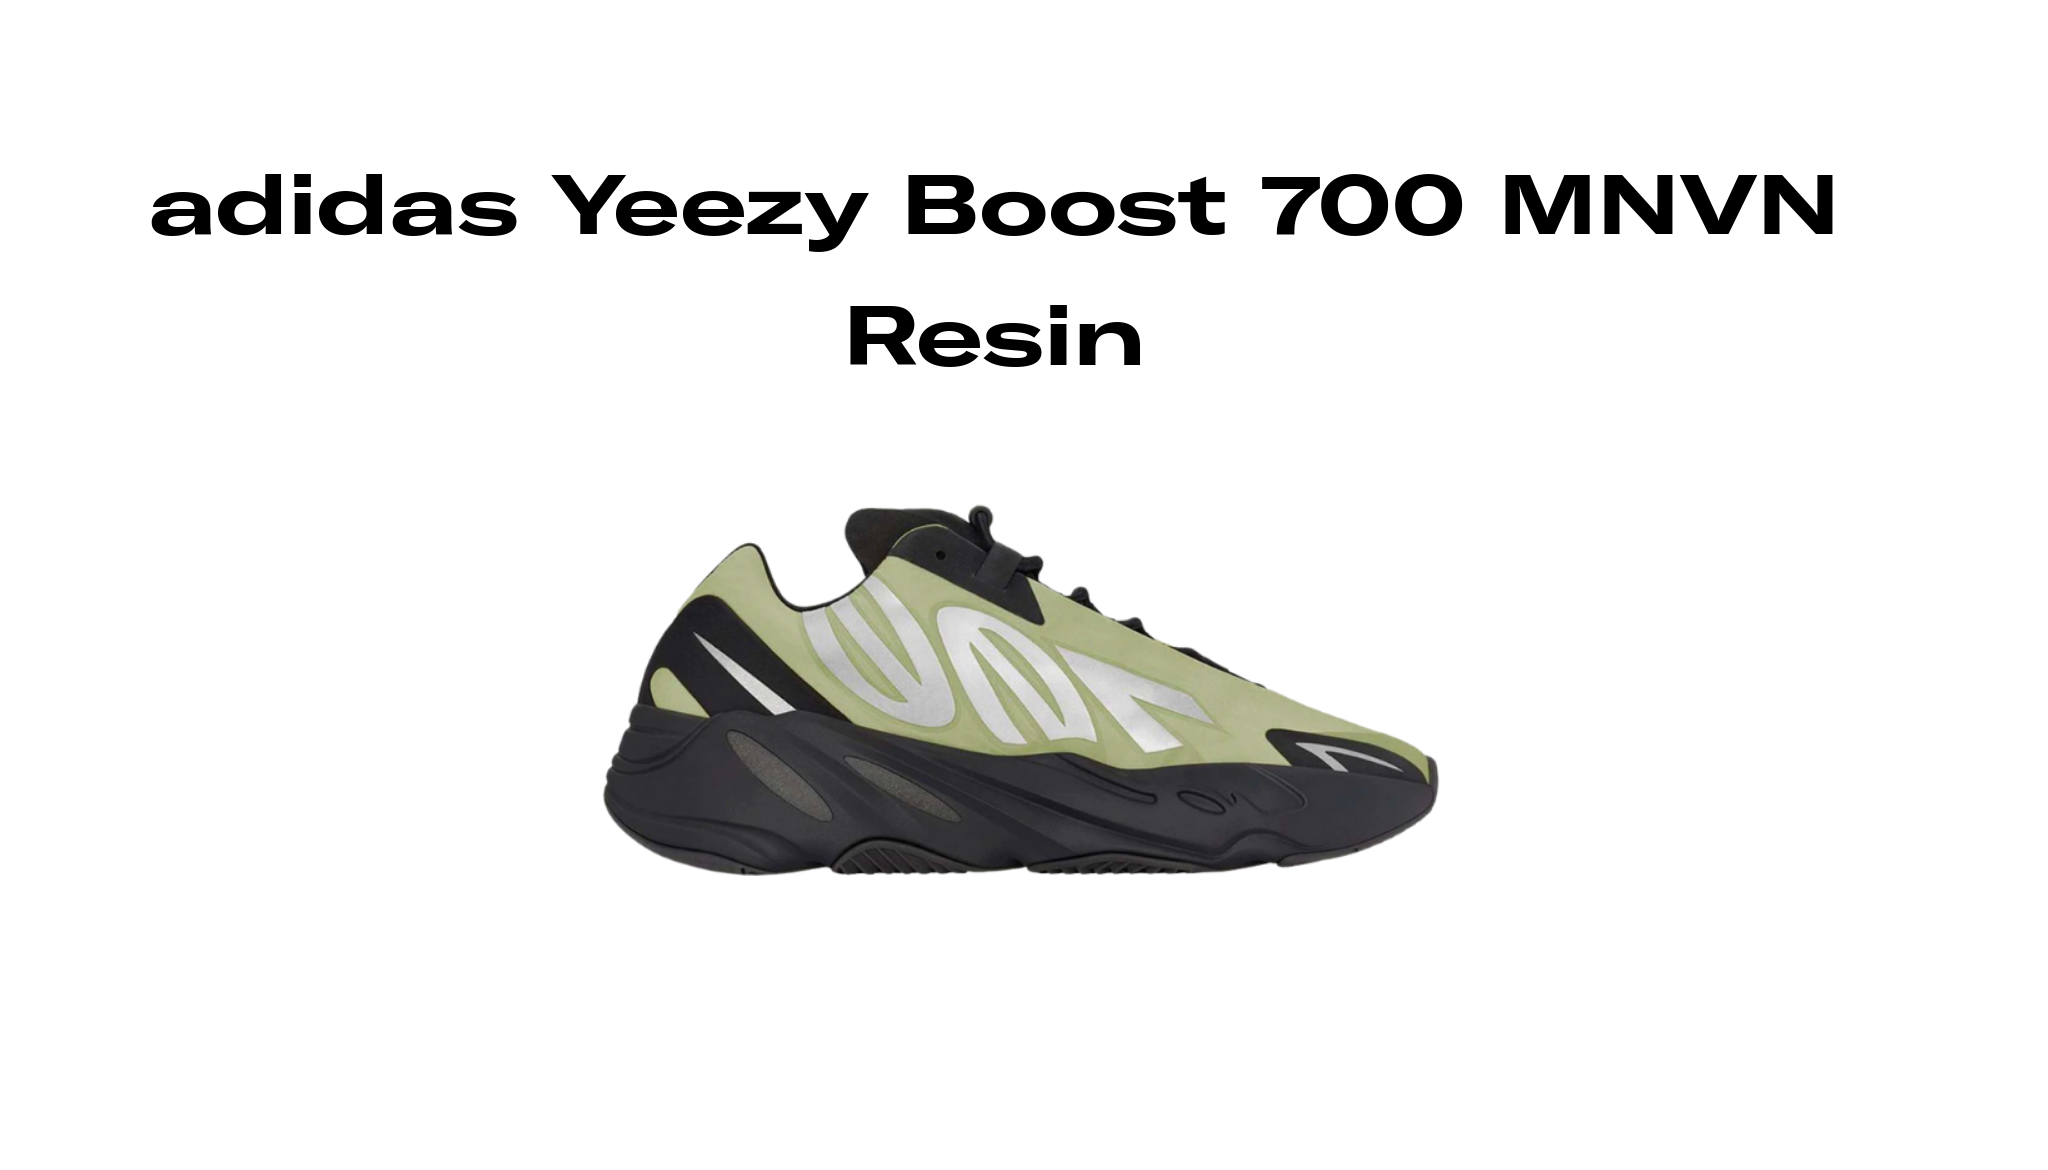 adidas Yeezy Boost 700 MNVN Resin, Raffles and Release Date | Sole 